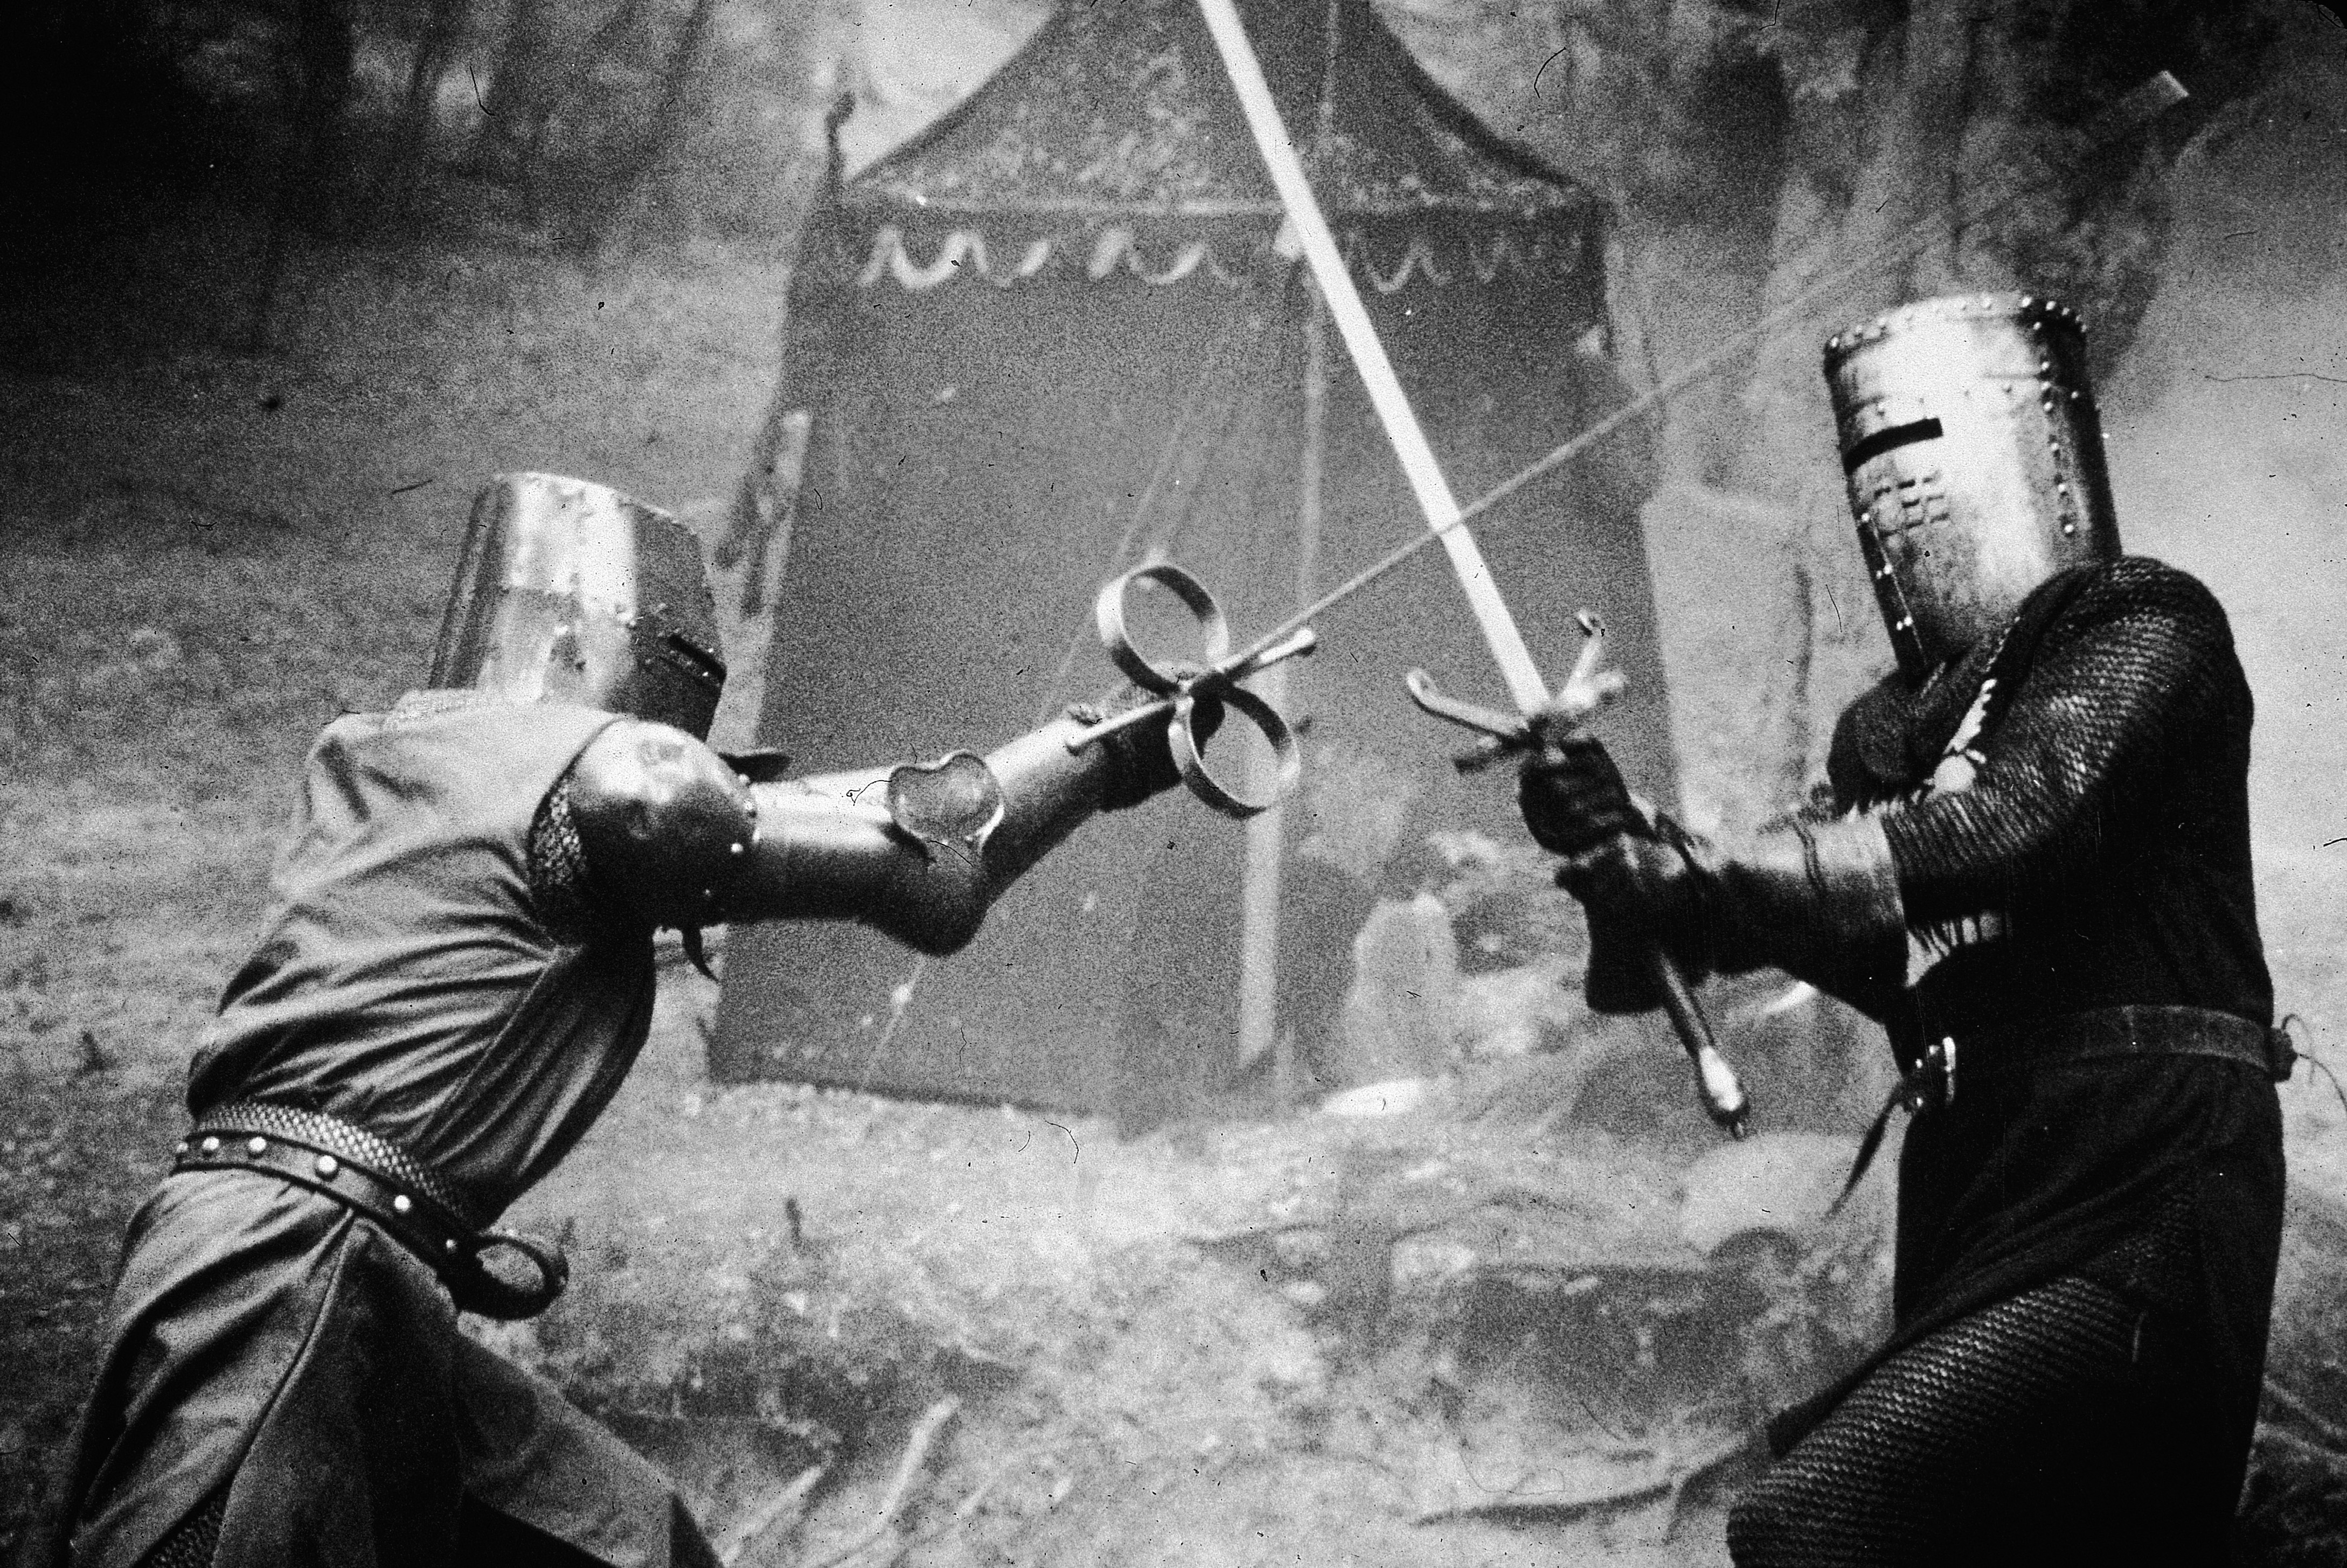 Still of Terry Gilliam, Terry Jones and Michael Palin in Monty Python and the Holy Grail (1975)